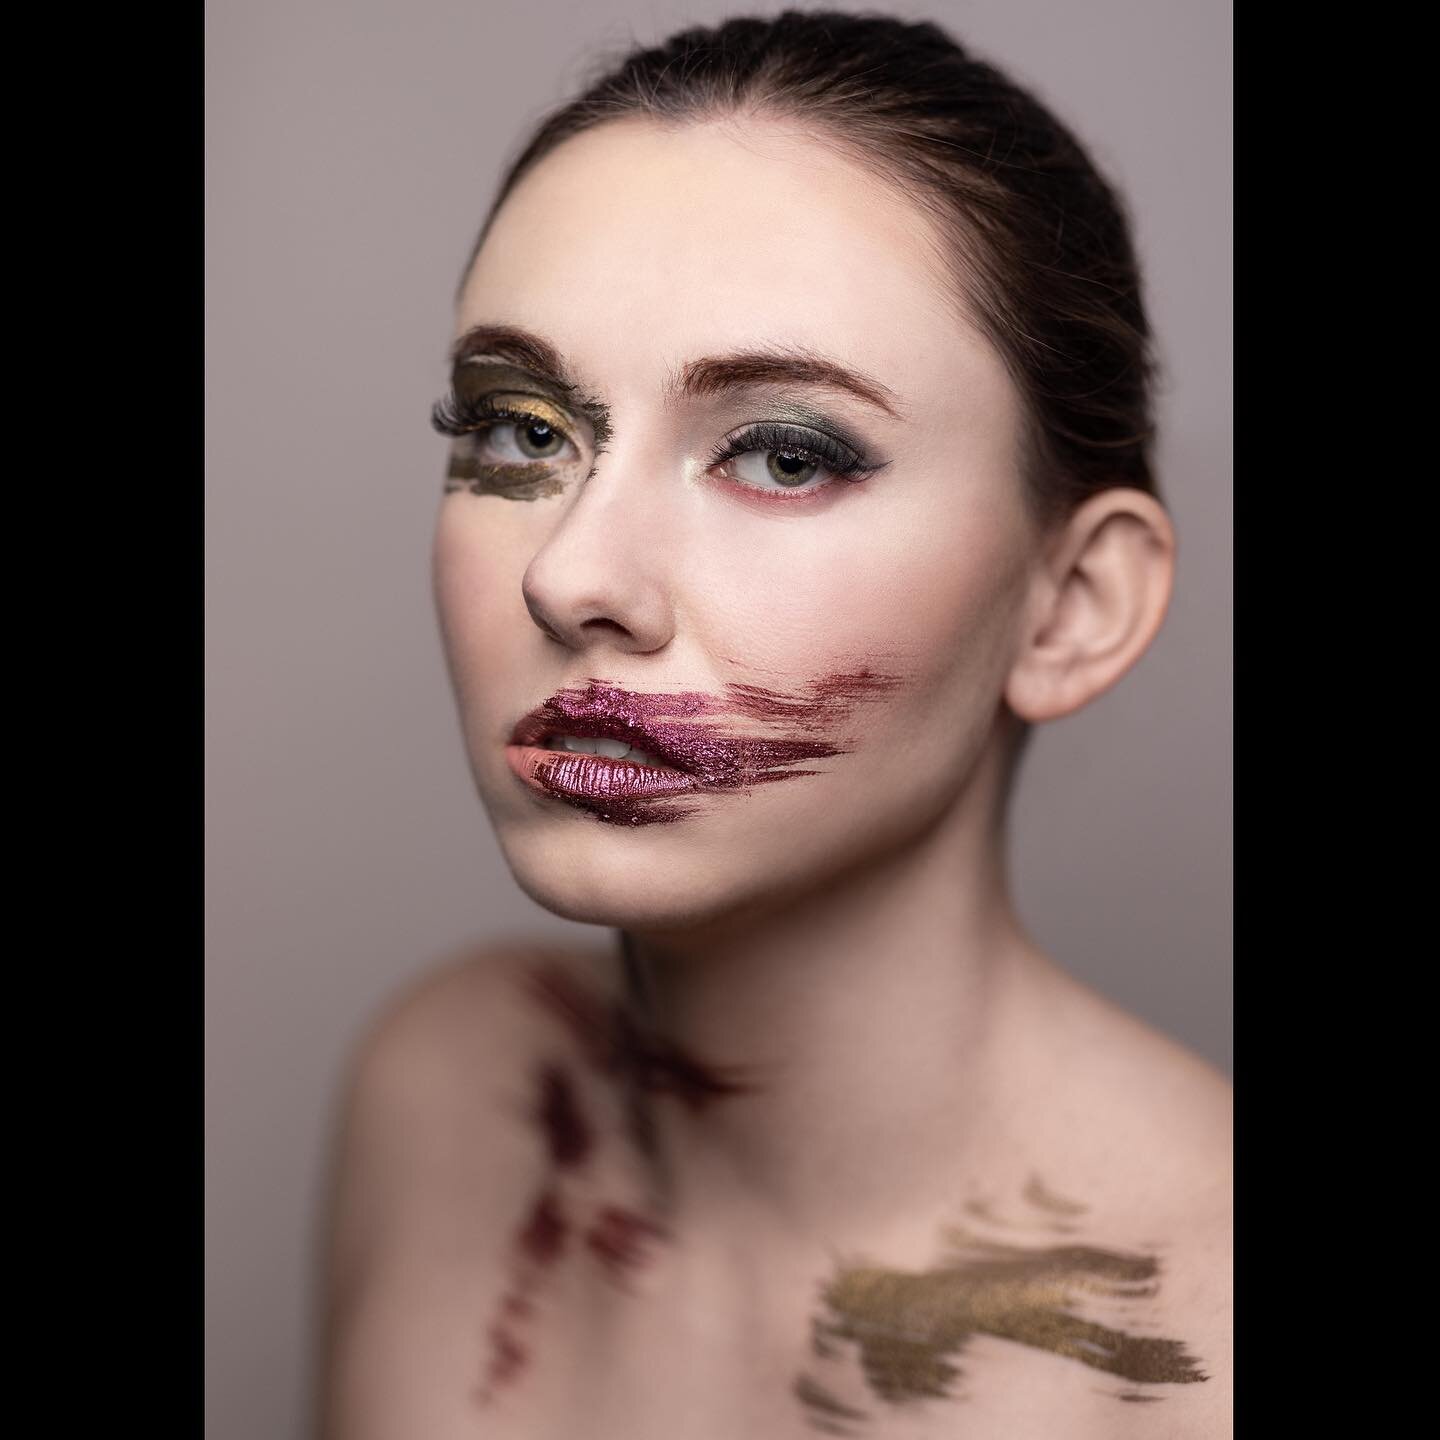 You are a work of art. Not everyone will understand you, but the ones who do will never forget about you. 

Photographer: Jenni Harper Young
Makeup Artist: Matt Goodlett
Model: Olivia Storment

#harperyoungphoto #portraitphotography #portraitphotogra